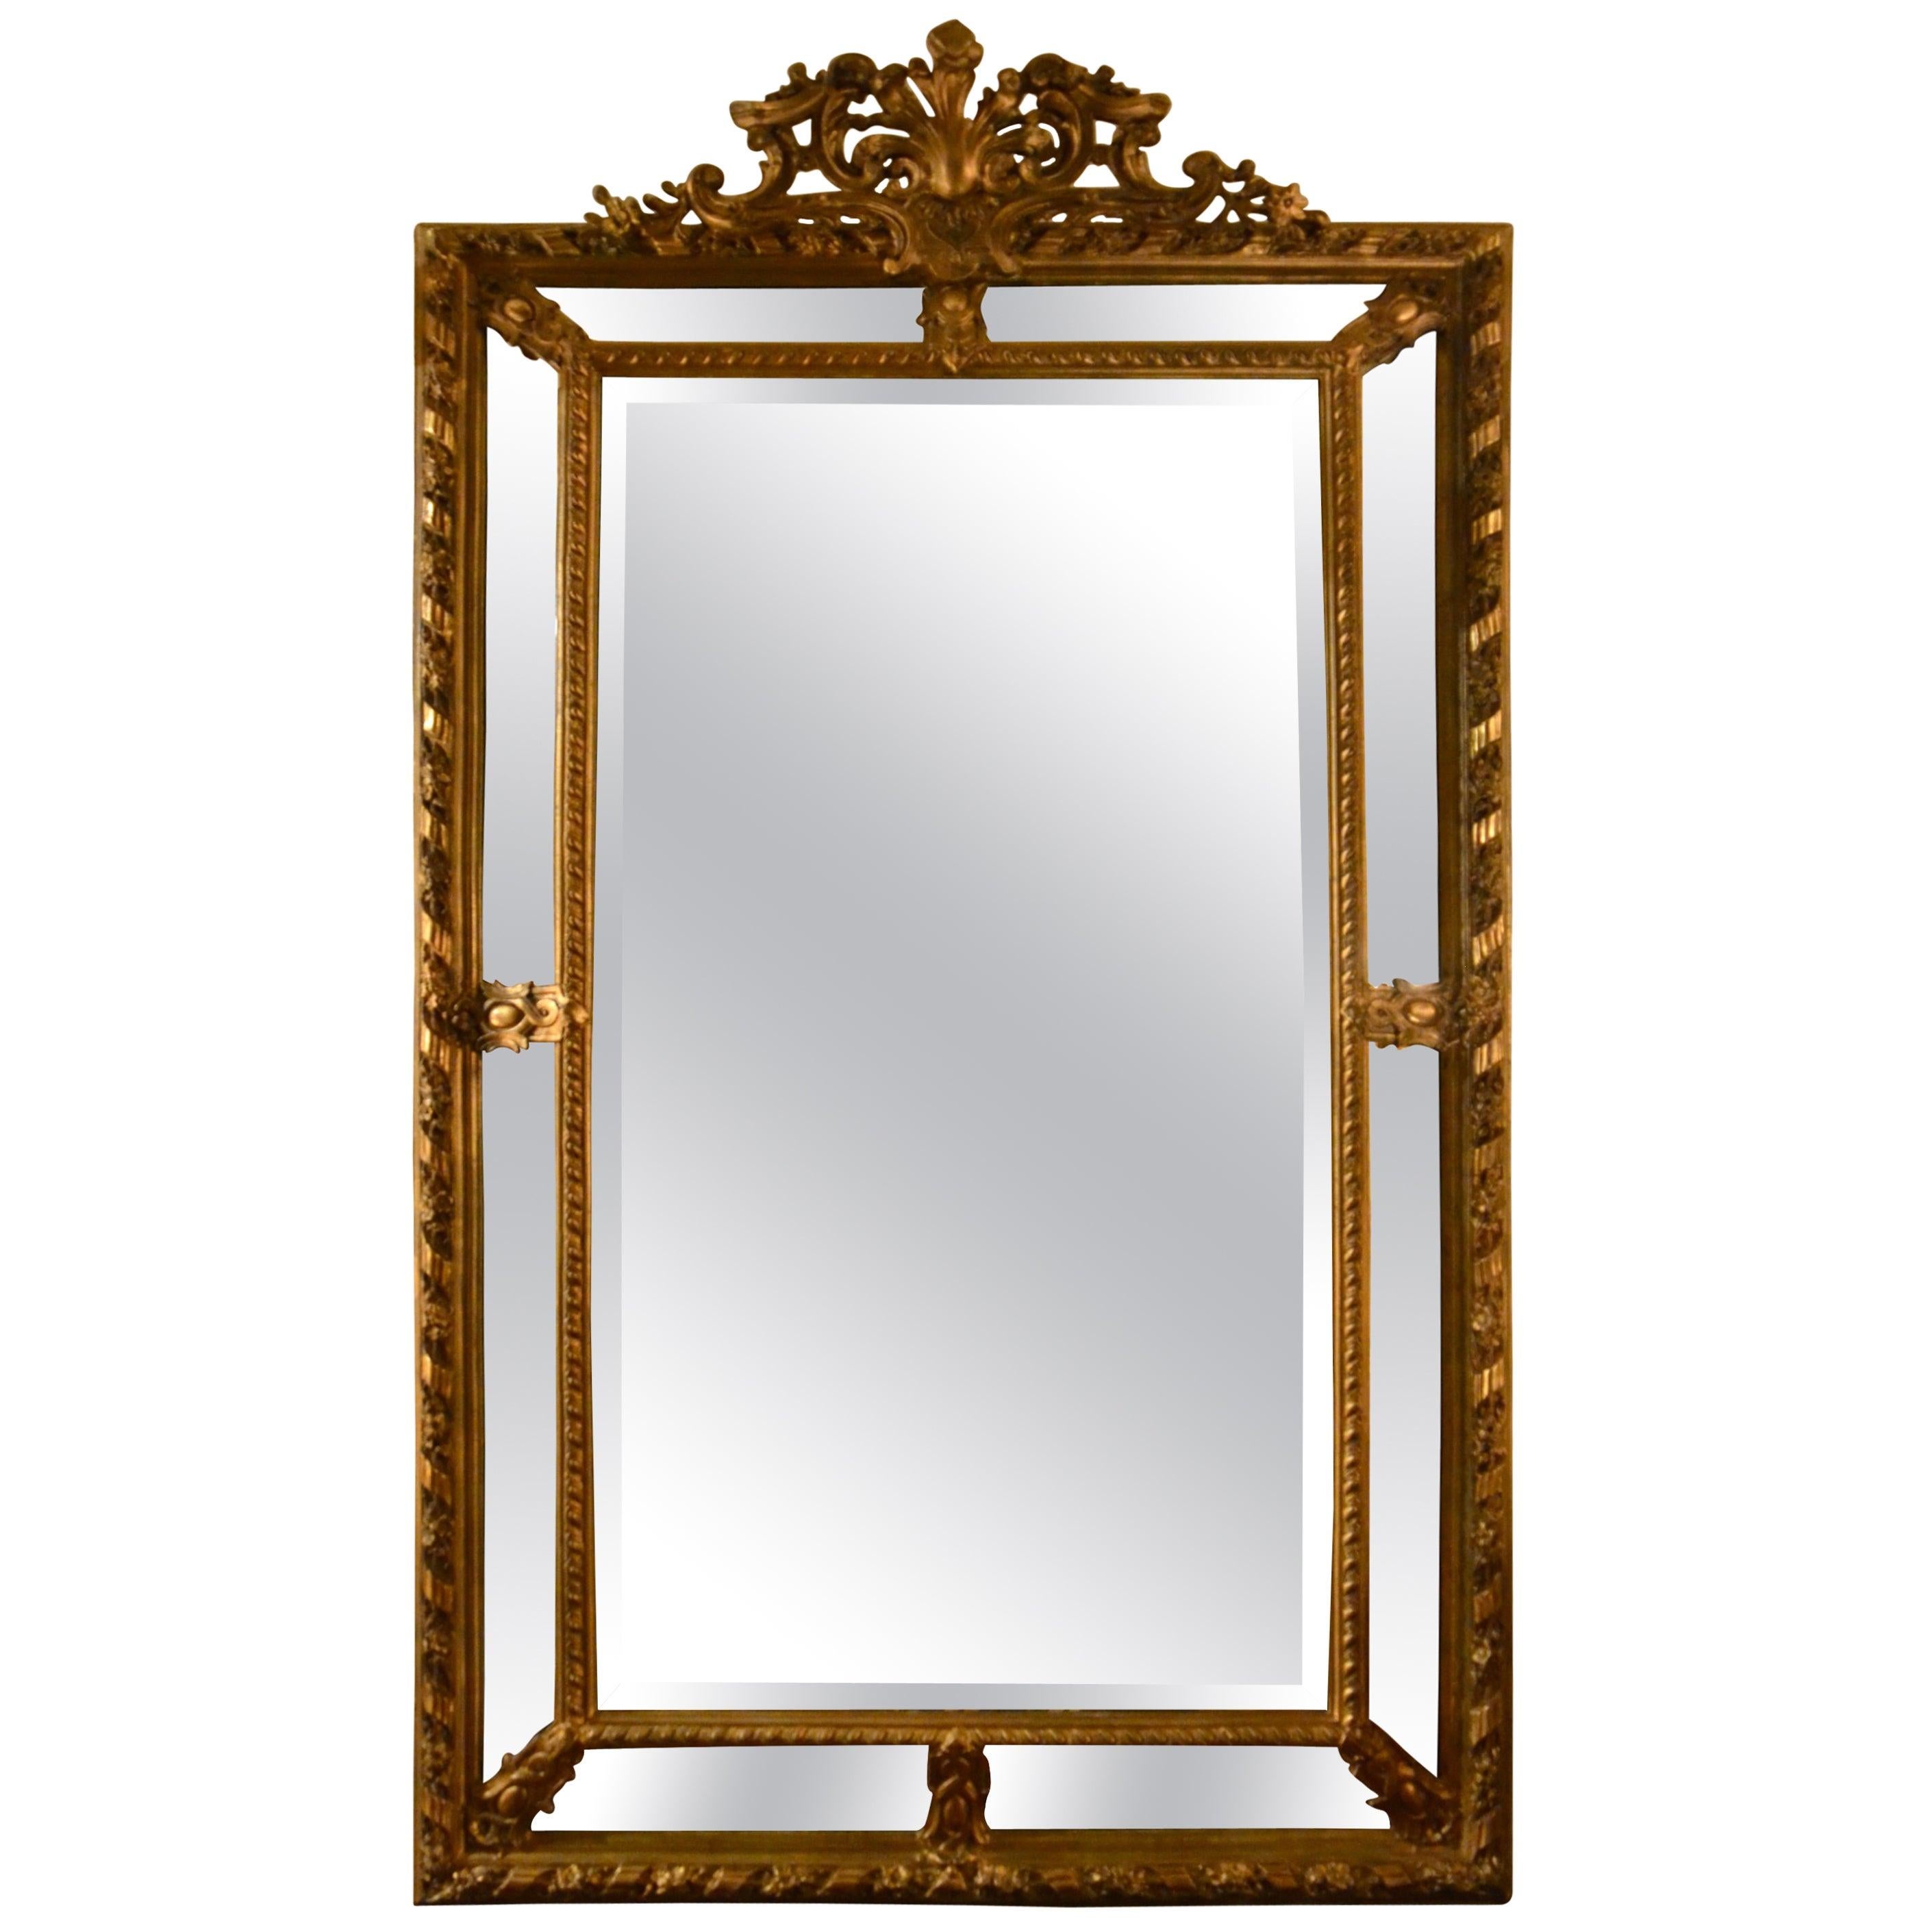 Antique French Louis XVI Style Gold Color Carved Wood Panelled Mirror circa 1890 In Good Condition For Sale In New Orleans, LA